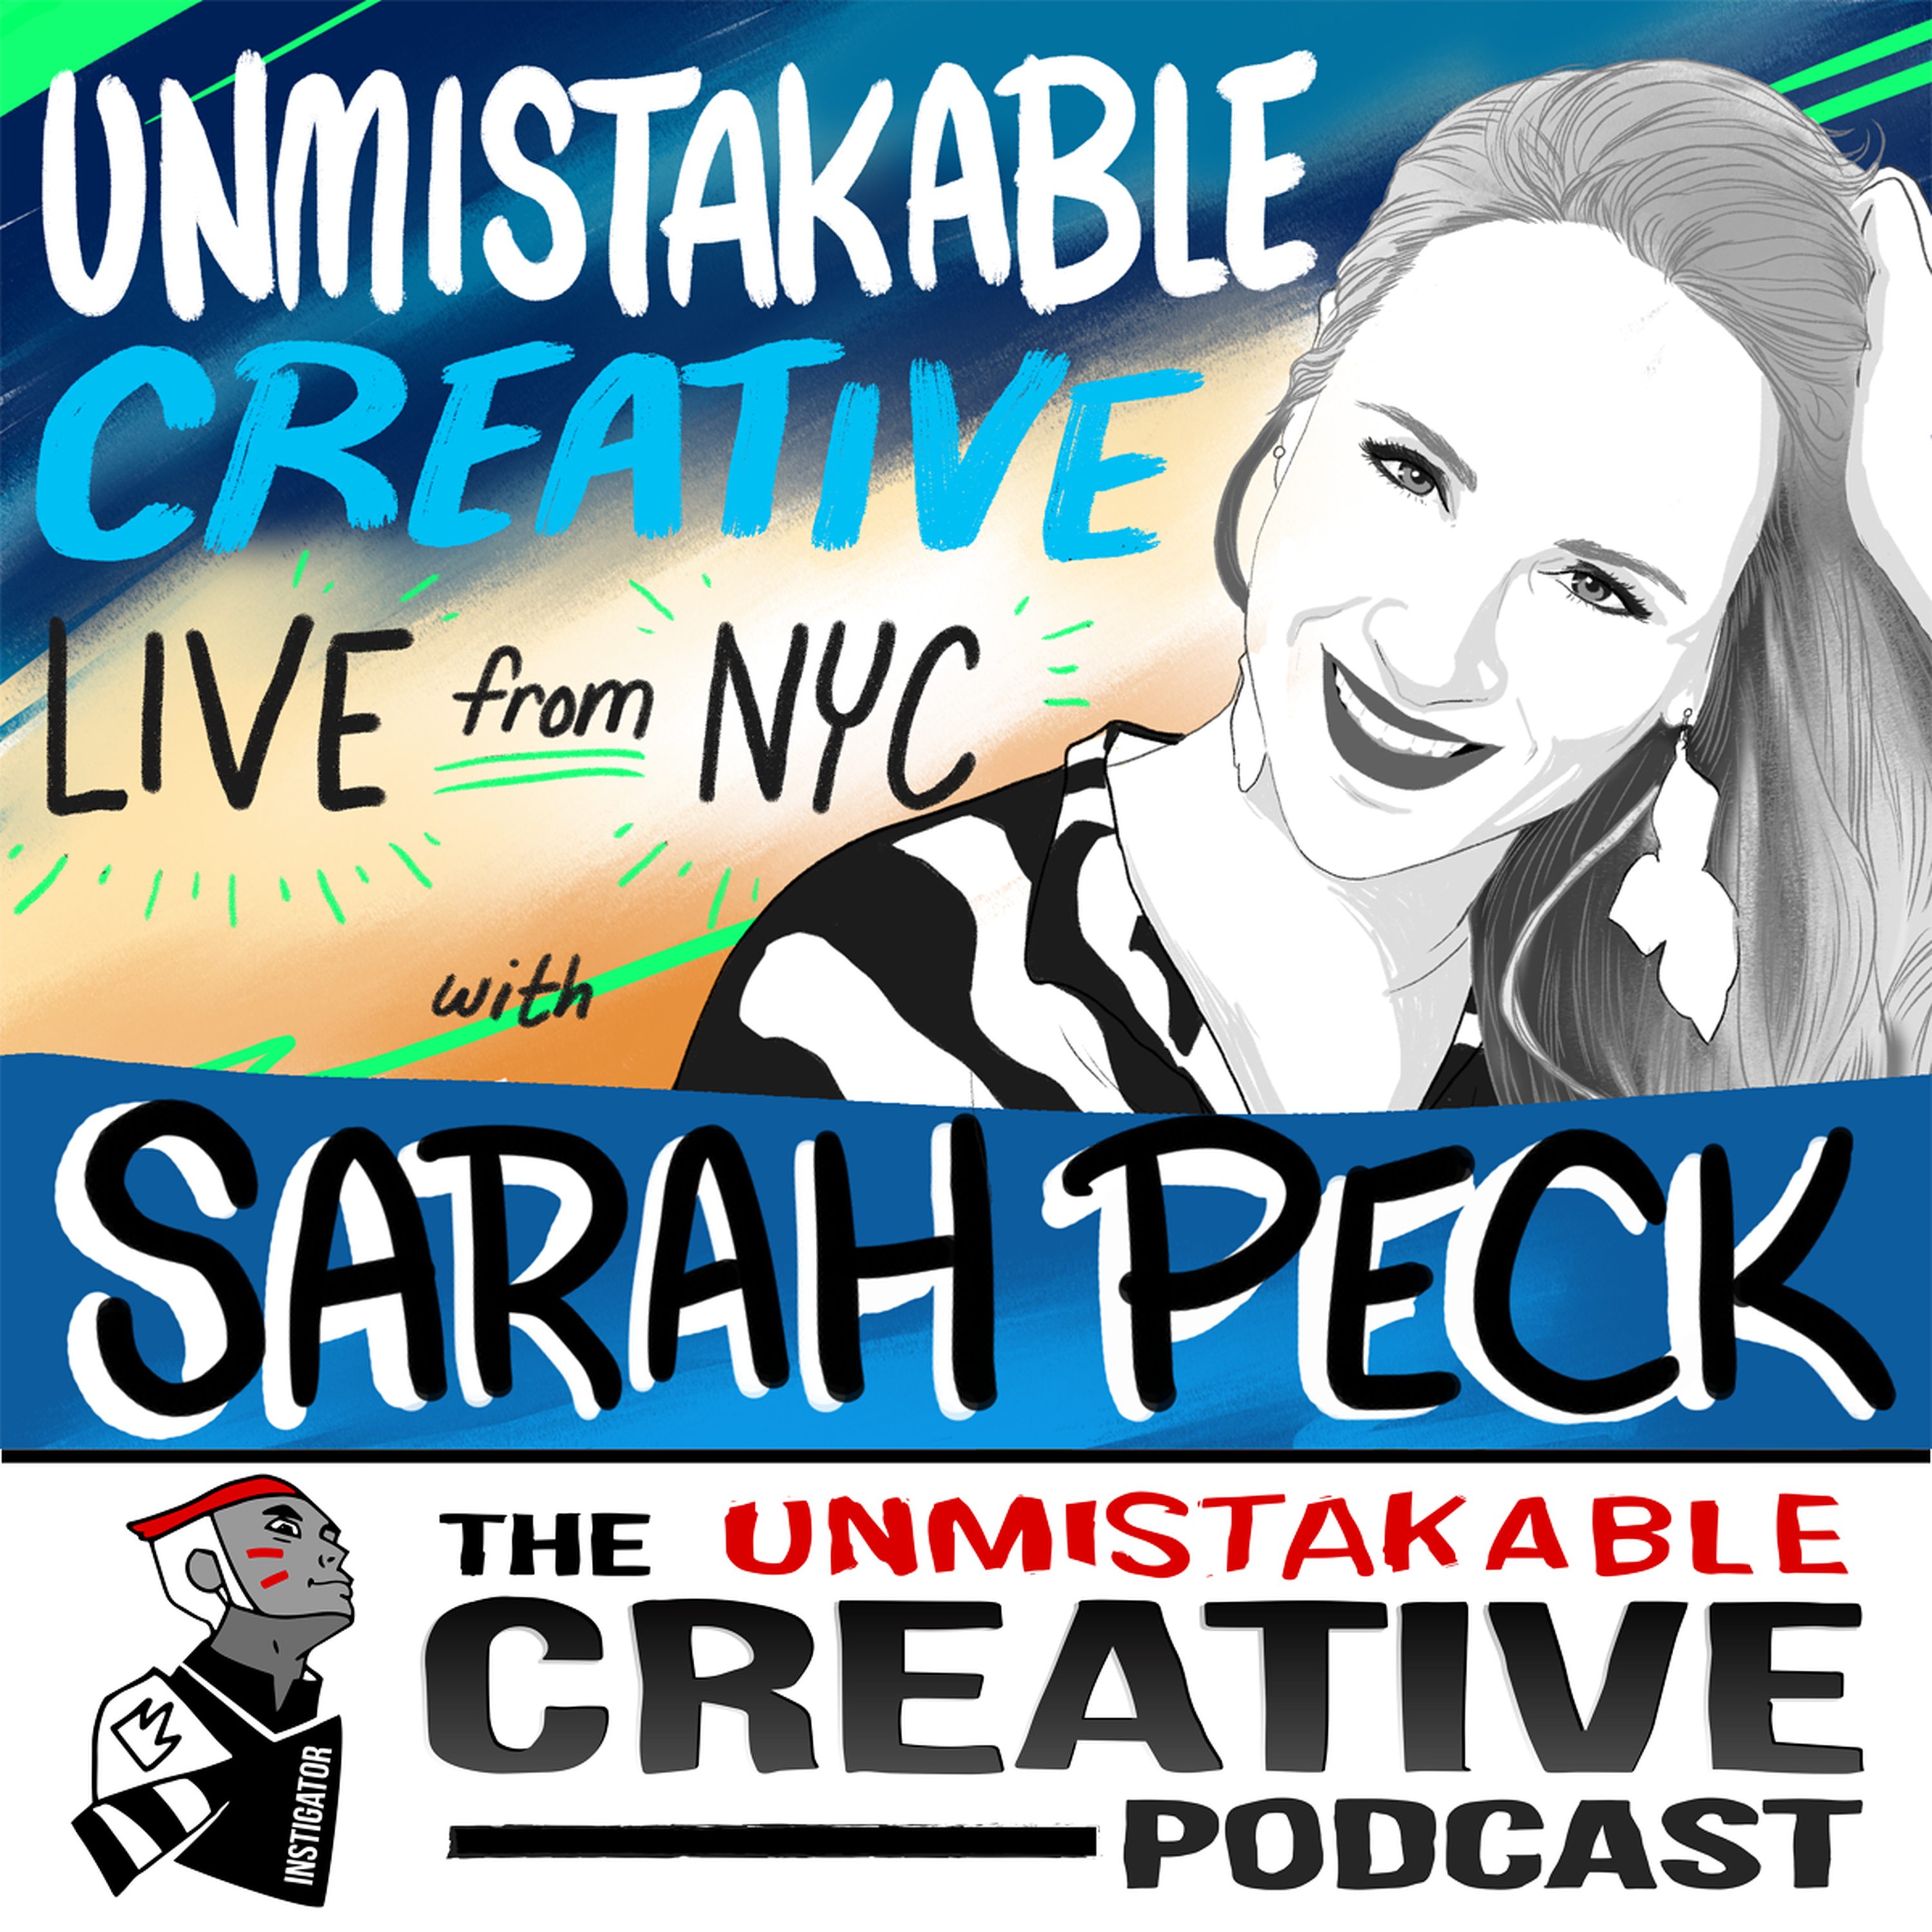 Unmistakable Creative Live from NYC with Sarah Peck